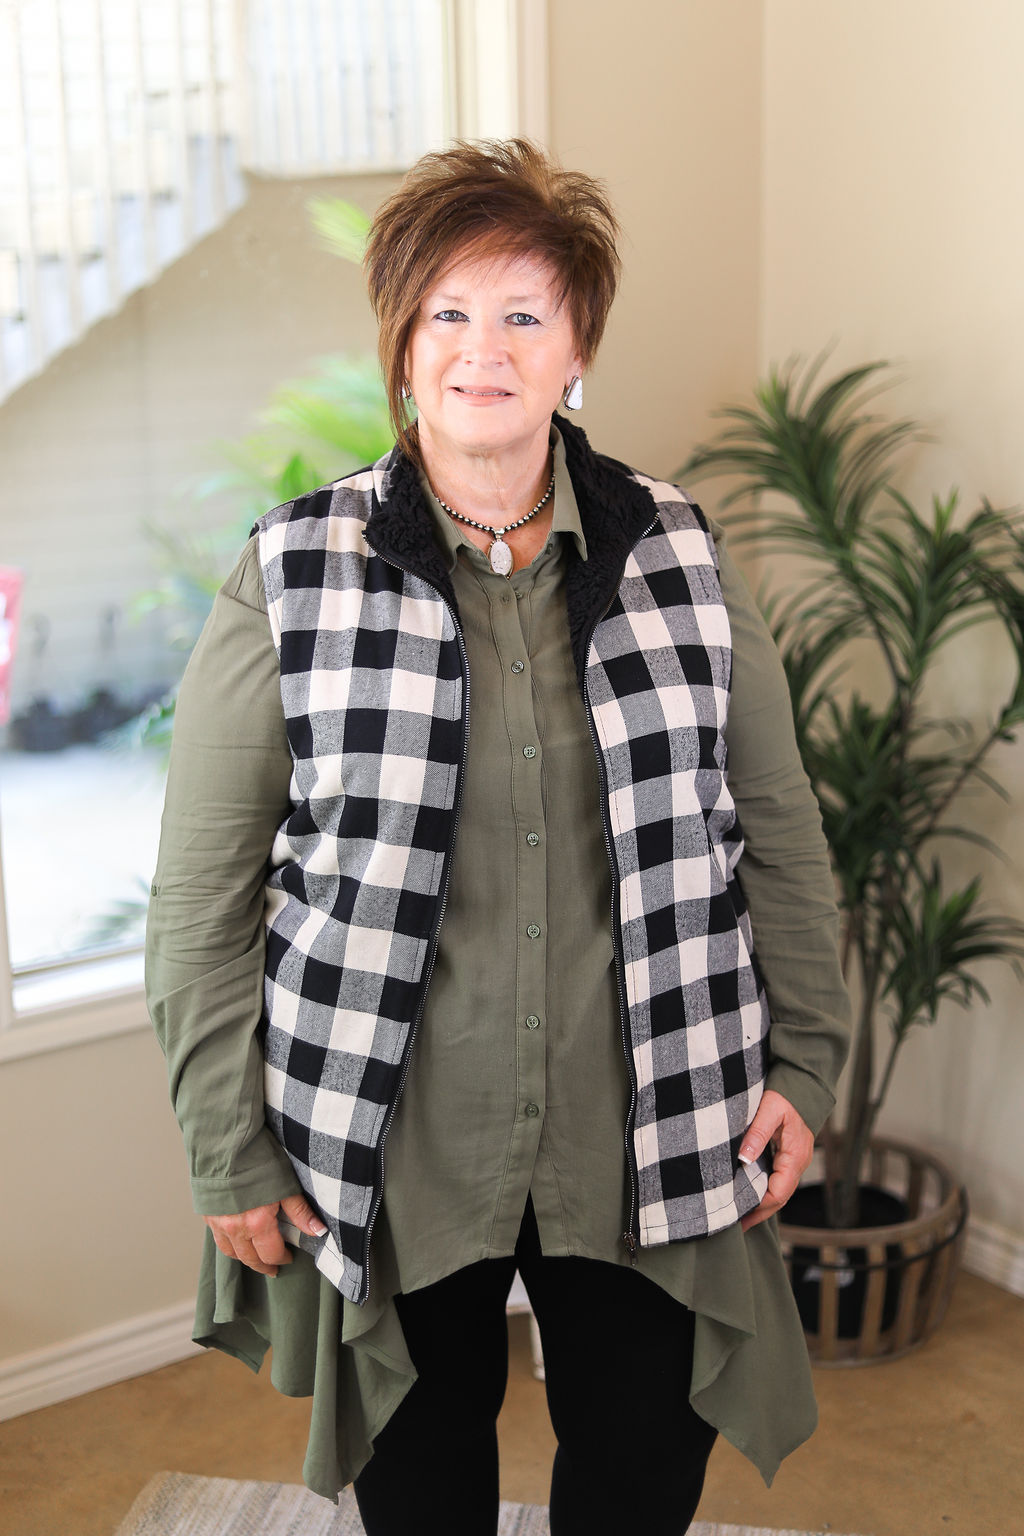 Meet Me In Aspen Buffalo Plaid Sherpa Lined Zip Up Vest in Black - Giddy Up Glamour Boutique